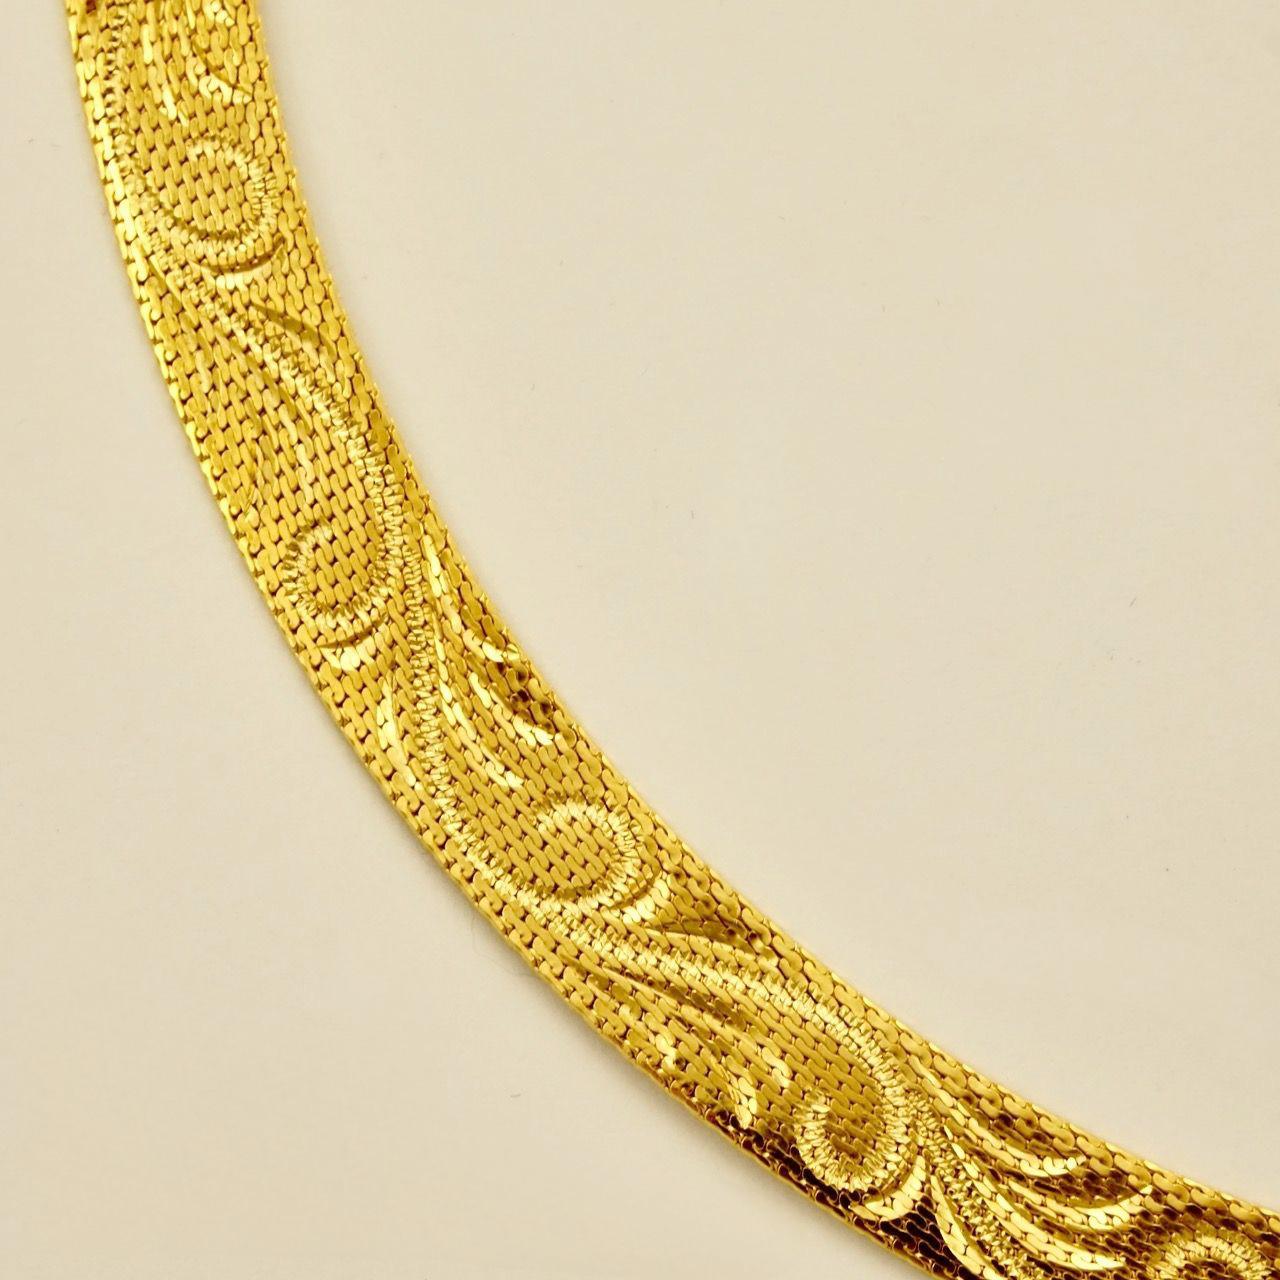 Beautiful bright gold plated mesh necklace, featuring a lovely swirl design. Measuring length approximately 38 cm / 15 inches, plus an extension chain of 5.5 cm / 2 inches, by width 8 mm / .3 inch. The necklace is in very good condition, as